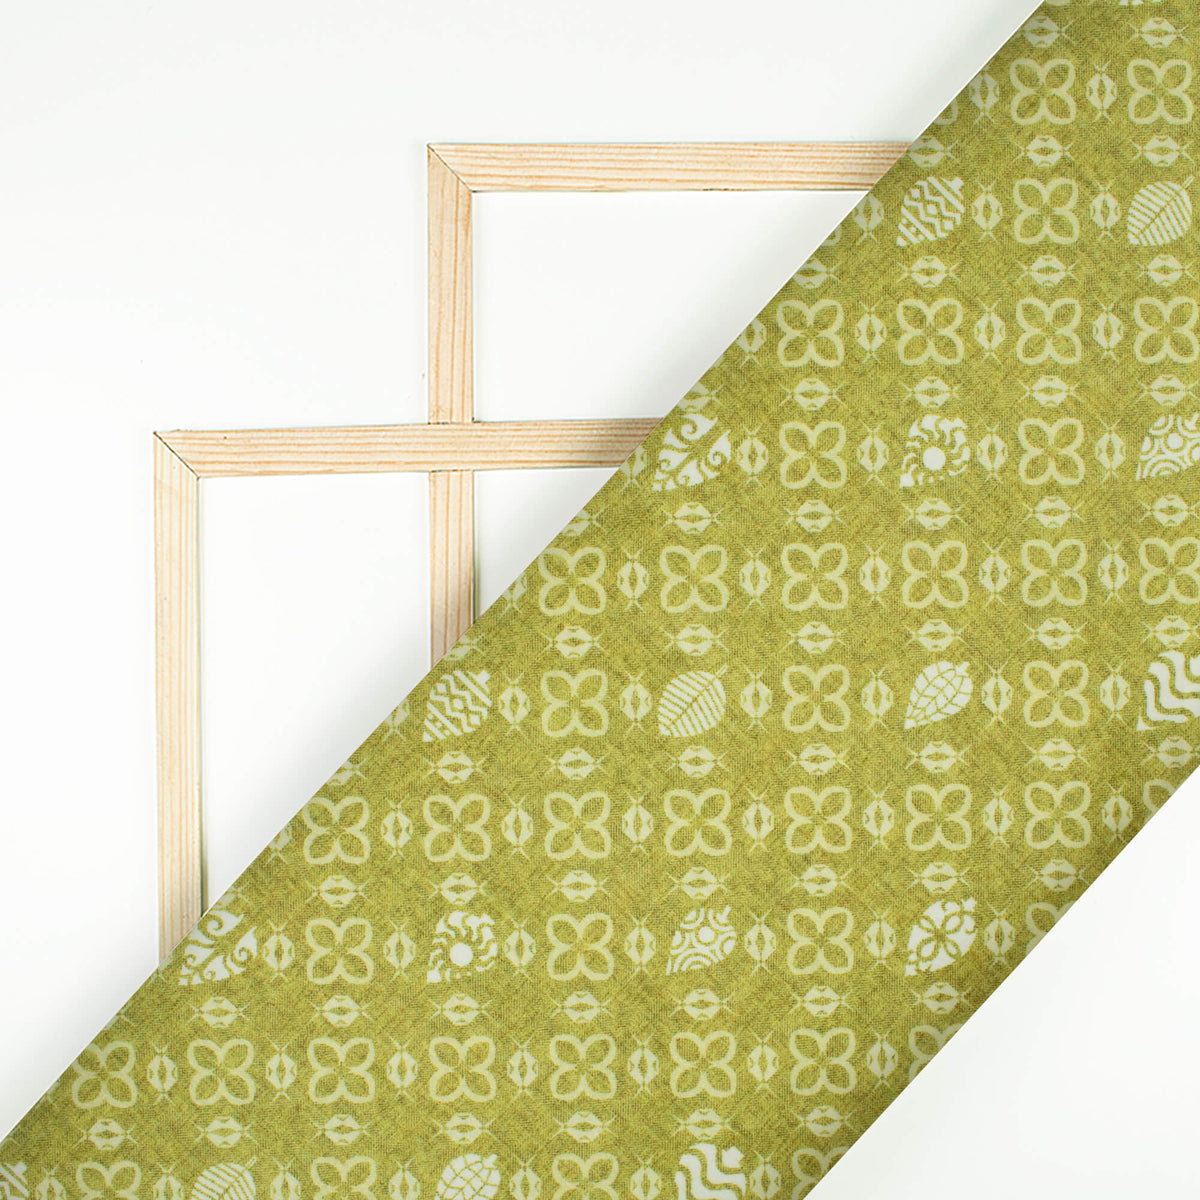 Moss Green And Off White Traditional Pattern Digital Print Lush Satin Fabric